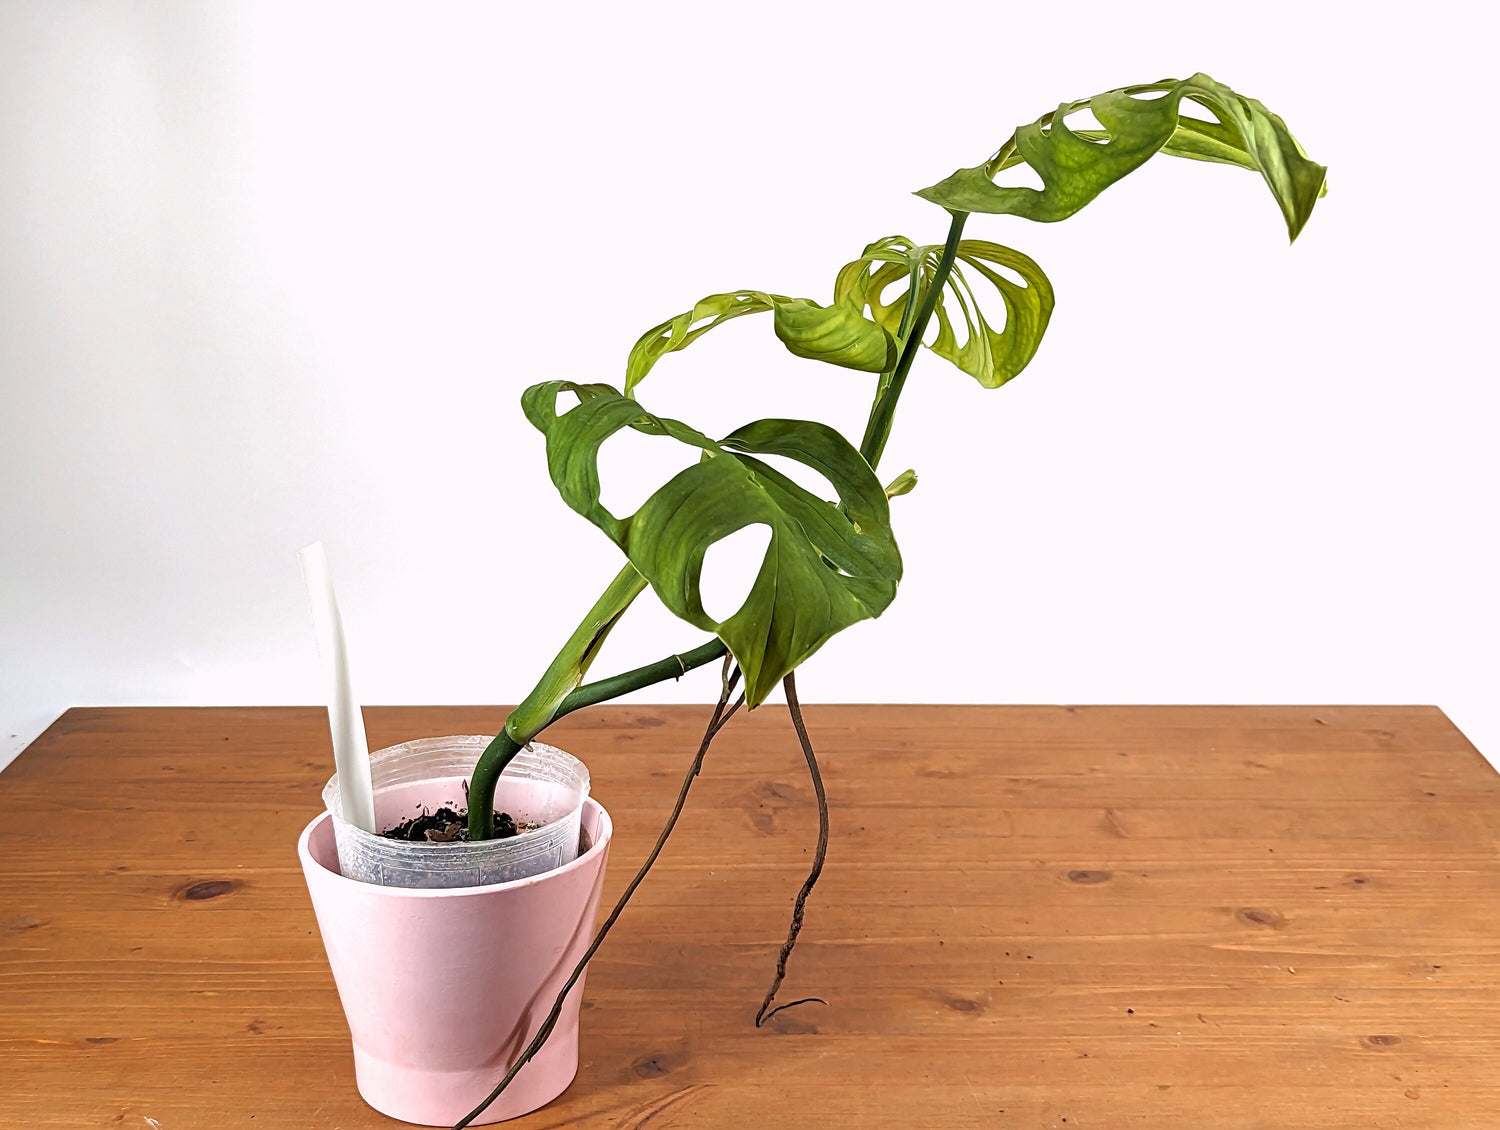 Monstera Esqueleto - XL Mature &amp; Rooted - Exact Plant Over 1 ft Tall!